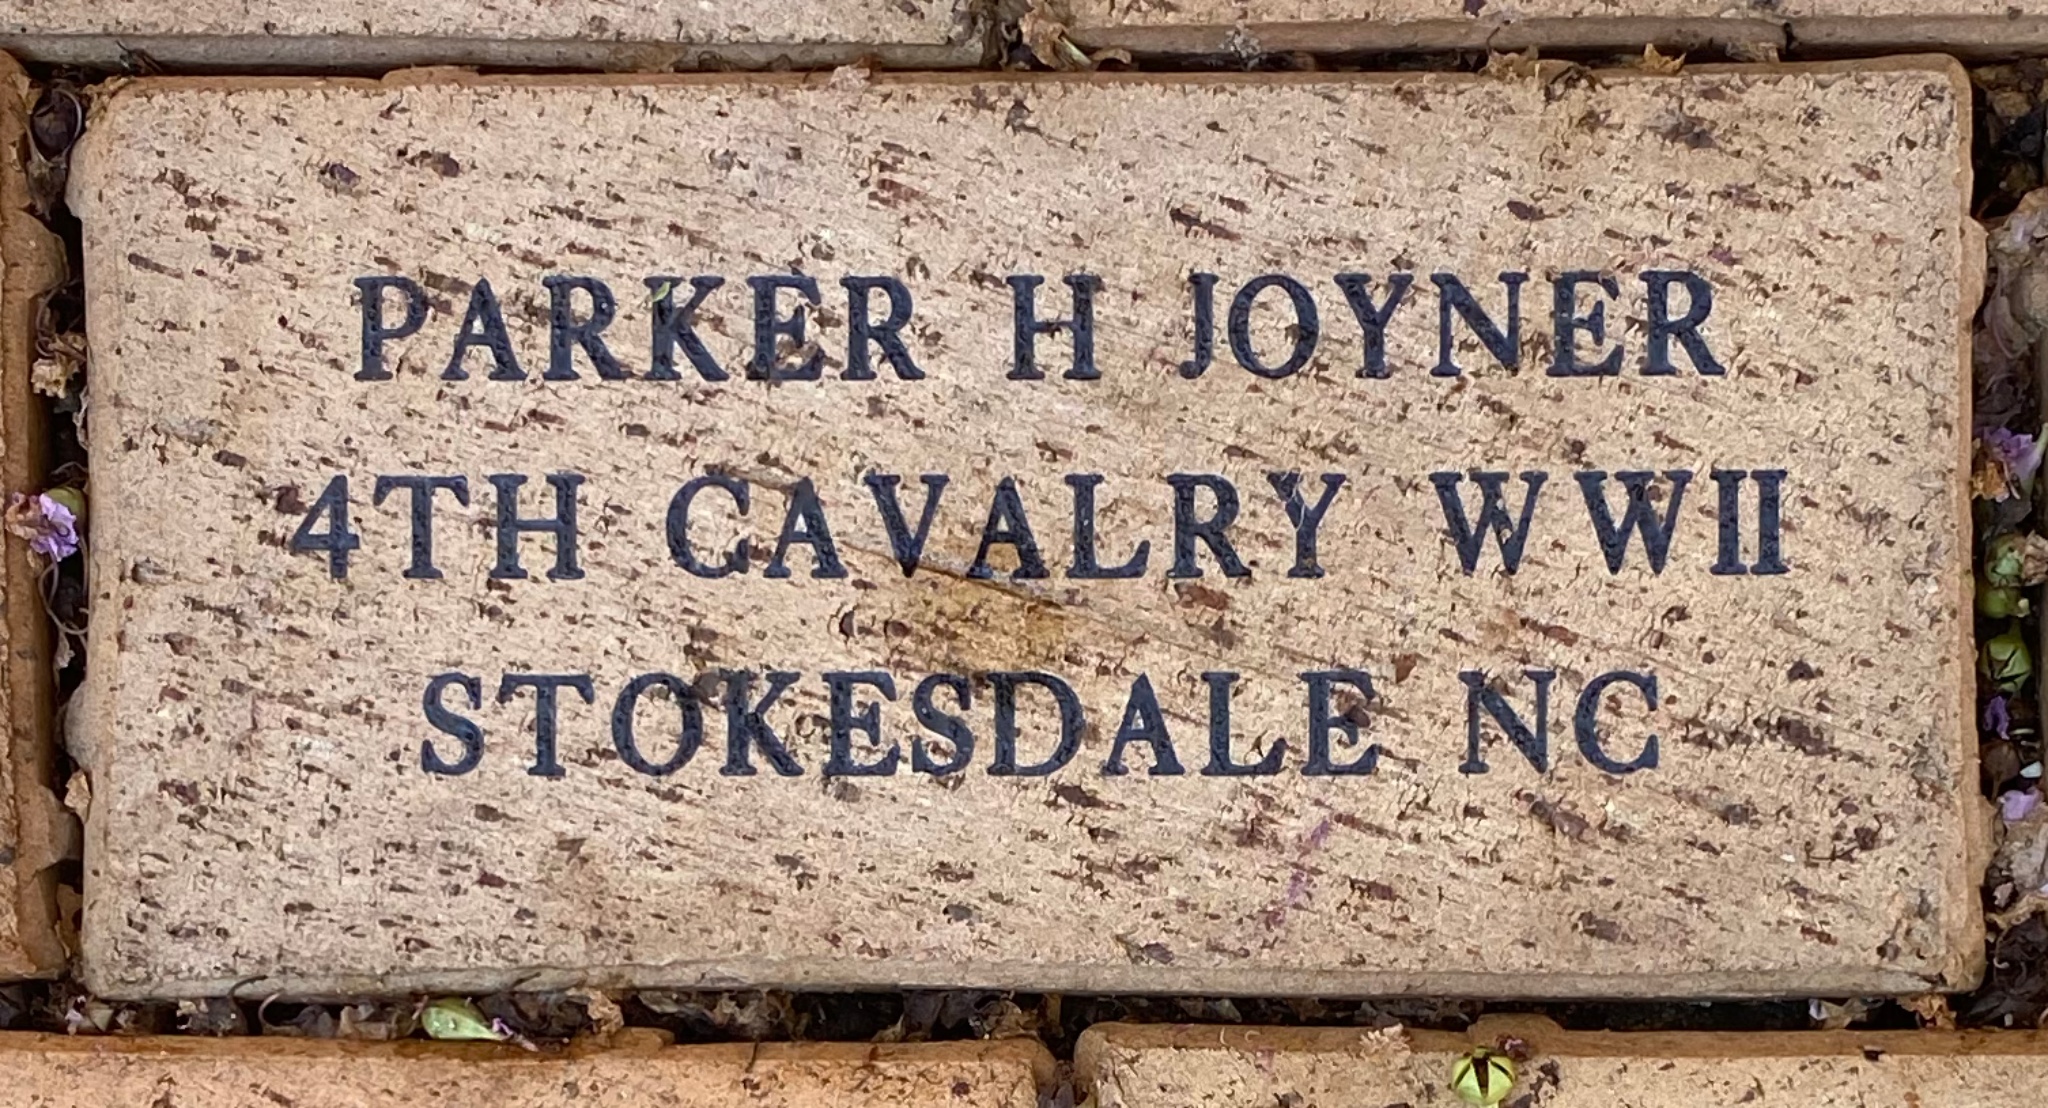 PARKER H JOYNER 4TH CAVALRY WWII STOKESDALE NC